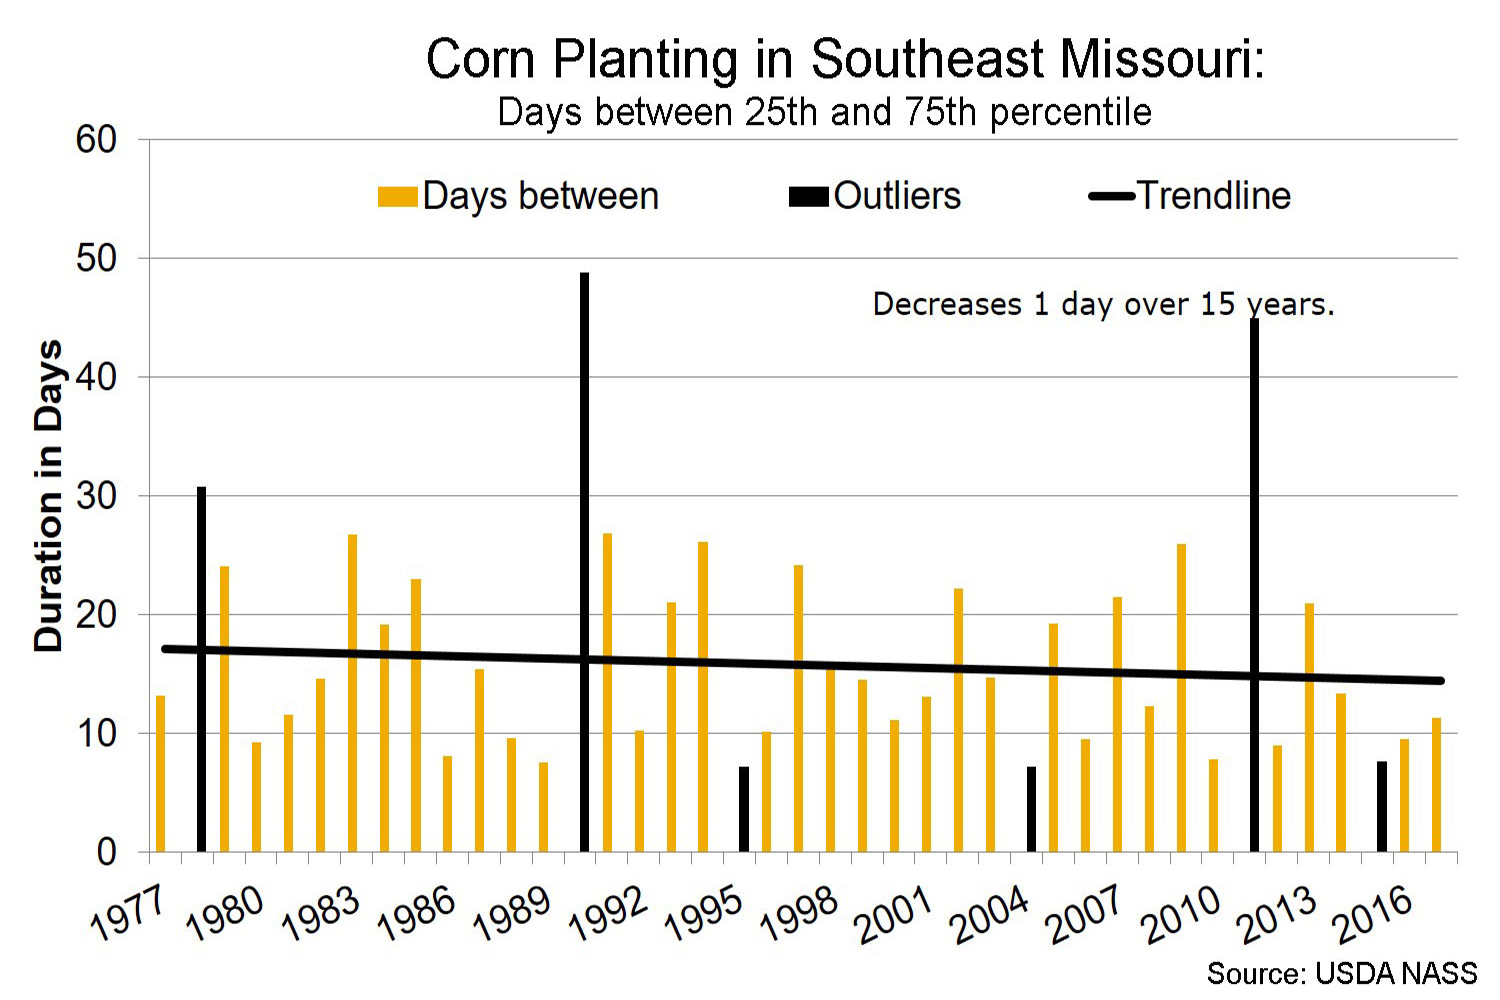 Corn planting in southeast Missouri days between 25th and 75th percentiles chart